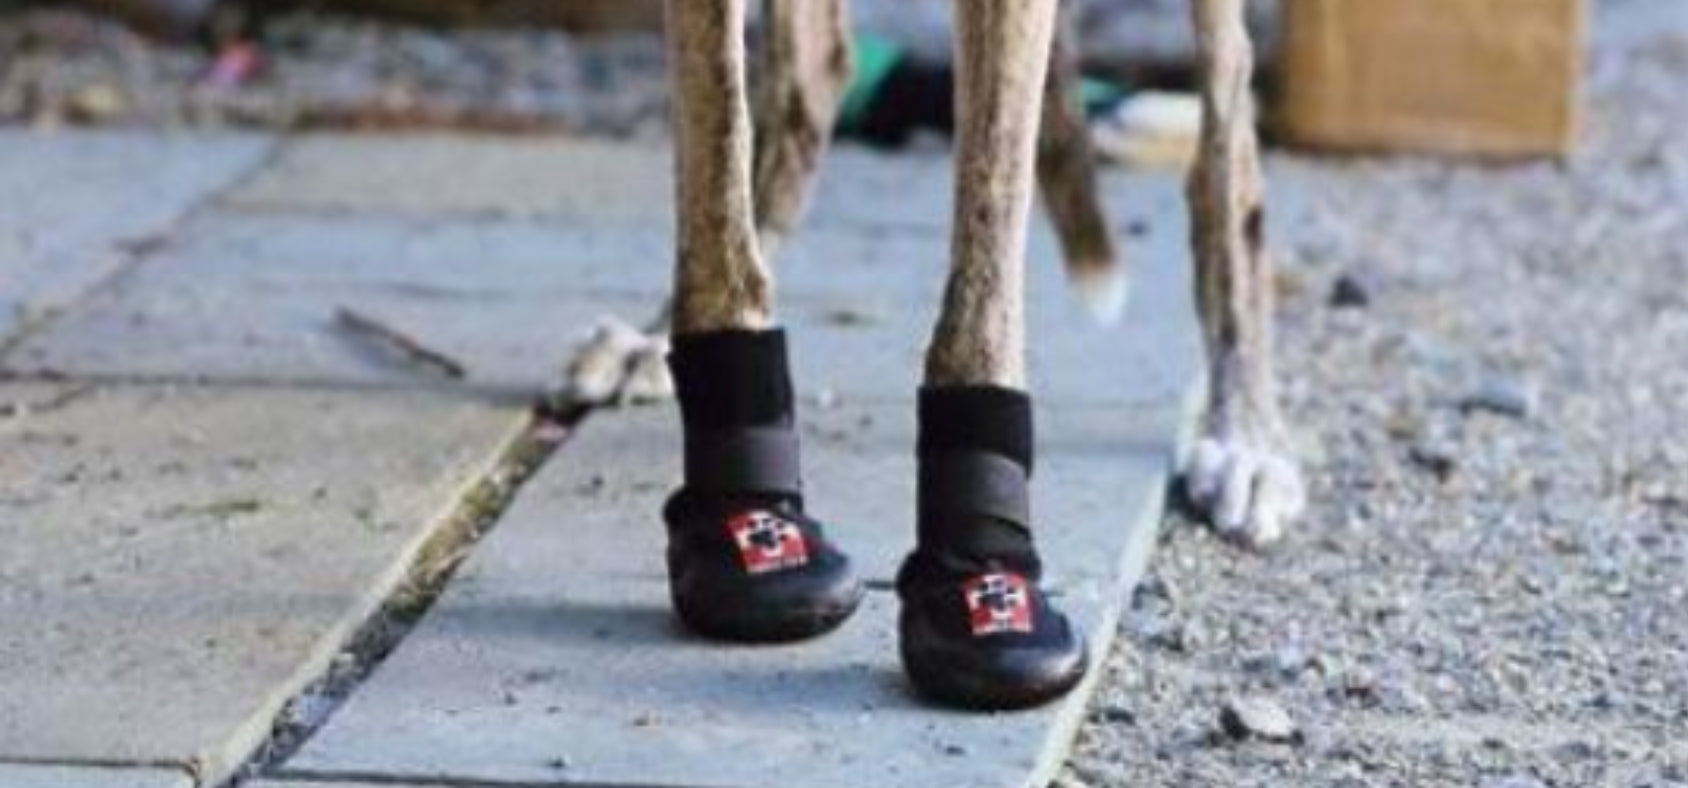 Protective Dog Boots - How to Choose the Right Ones